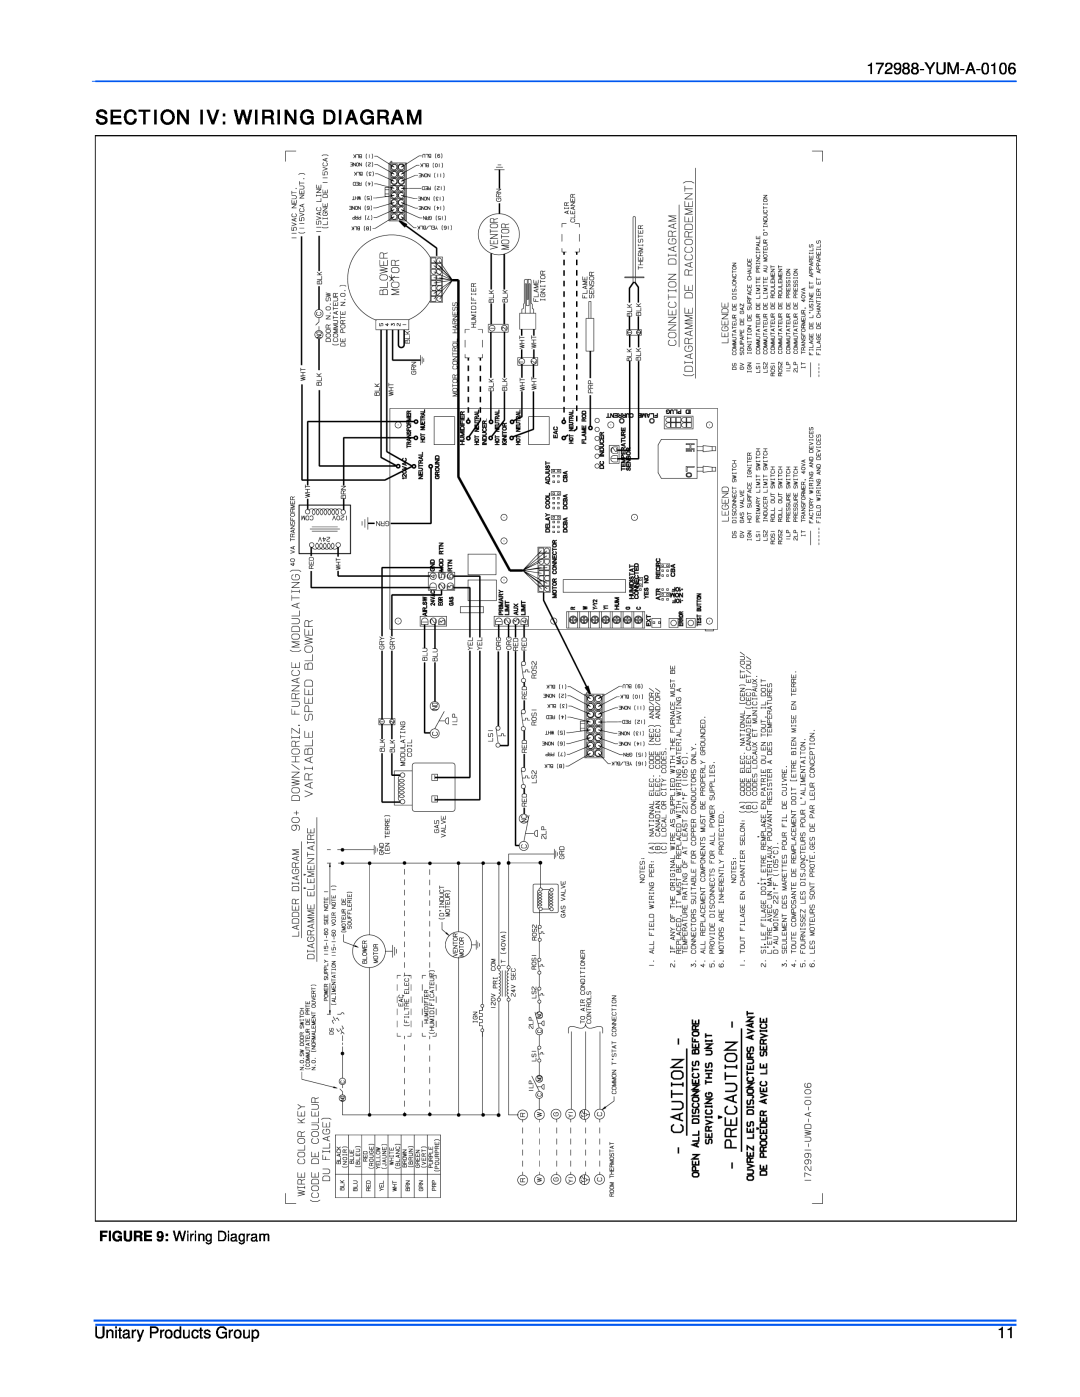 York PC9 service manual Section Iv Wiring Diagram, YUM-A-0106, Unitary Products Group 